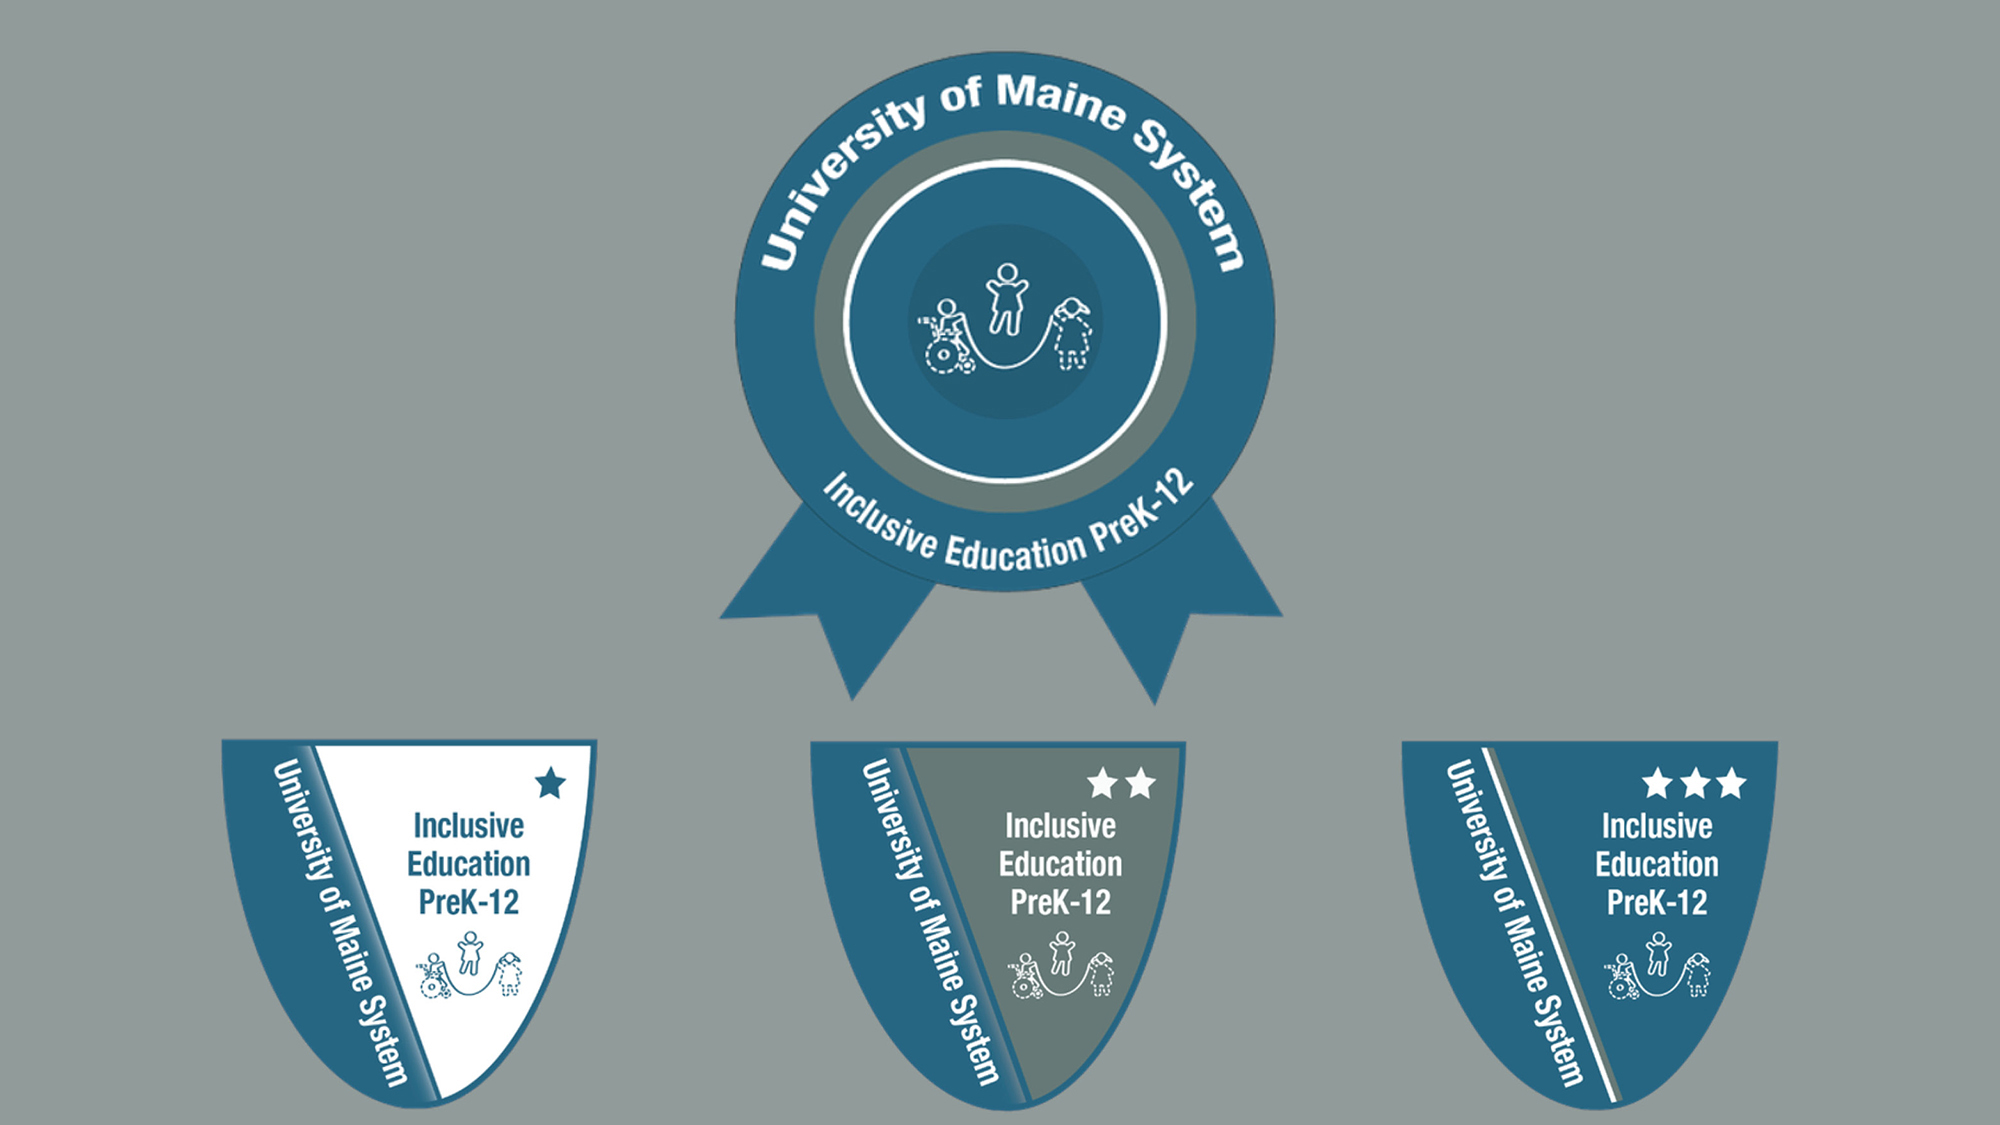 The Univesity of Maine System Inclusive Education PreK-12 micro-credential ribbon with the Level 1, 2 and 3 badges under the ribbon.